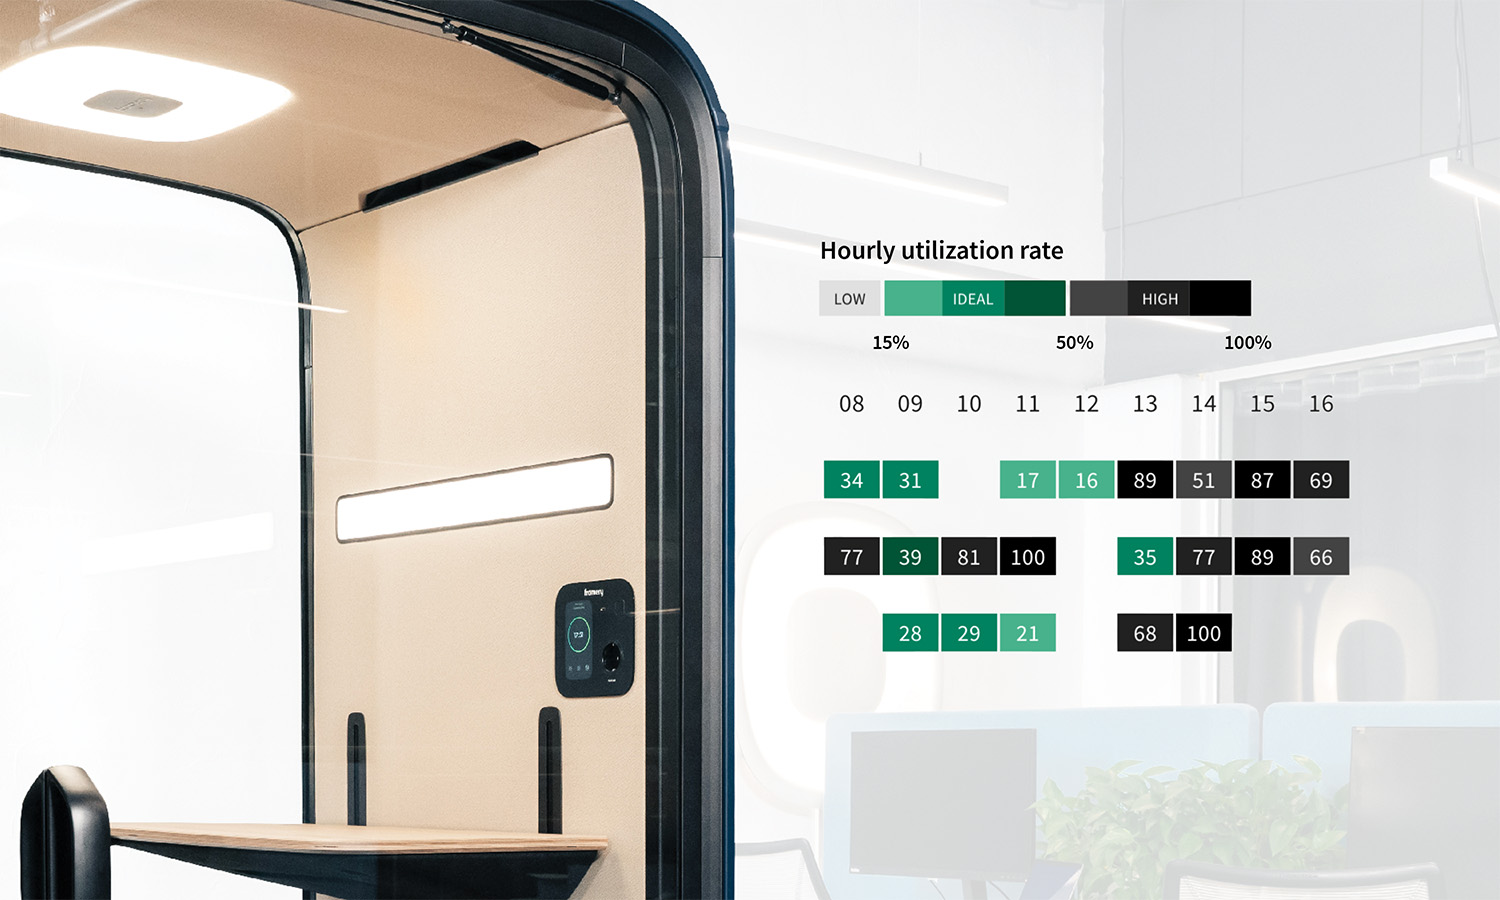 Framery Connect workplace management tool showing the hourly utilization rate of the office pods.